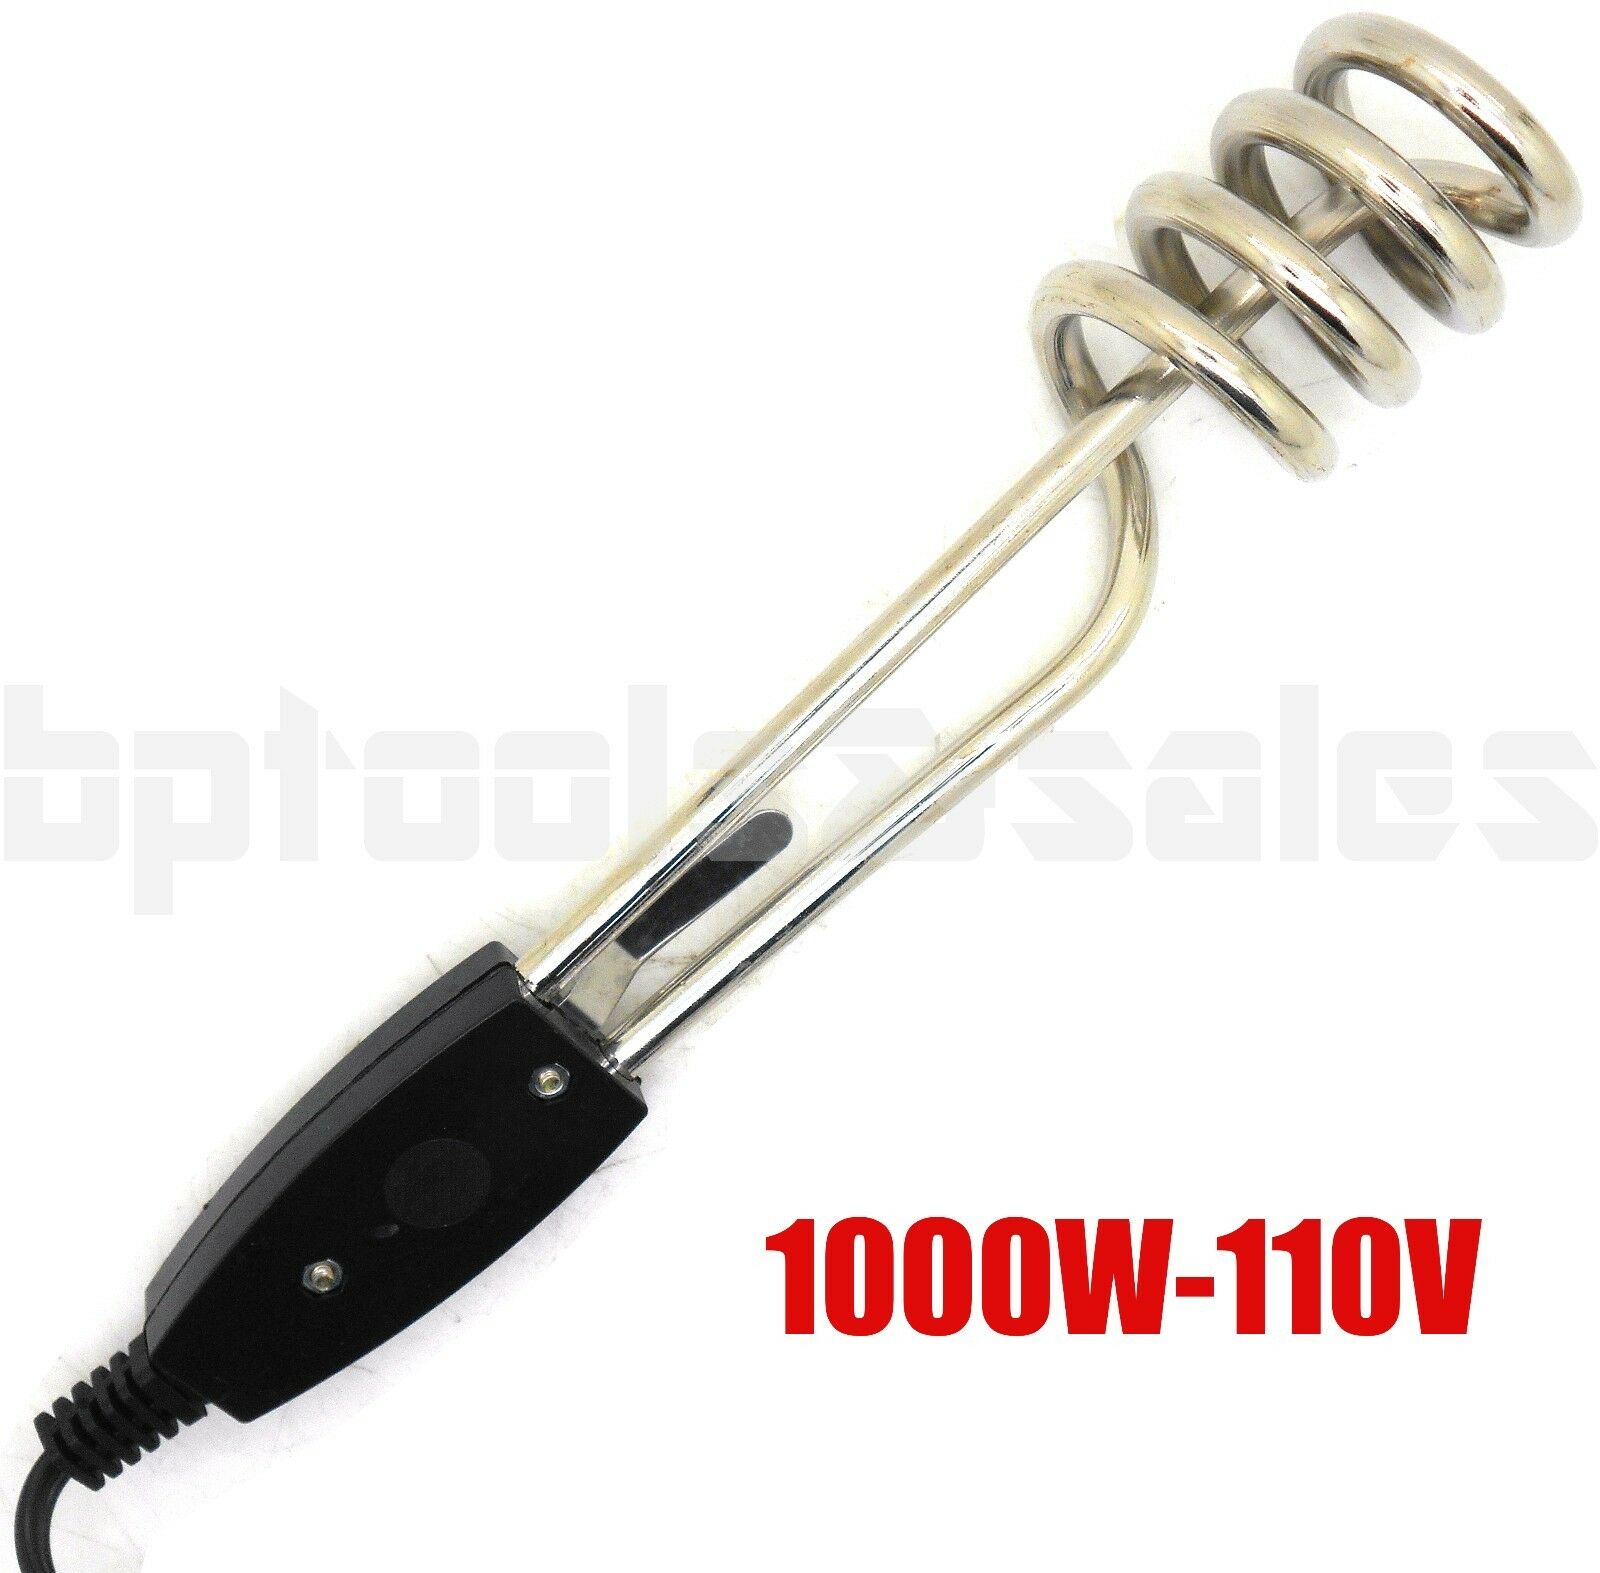 10" 1000w-110v Water Heater Portable Electric Immersion Element Boiler Travel